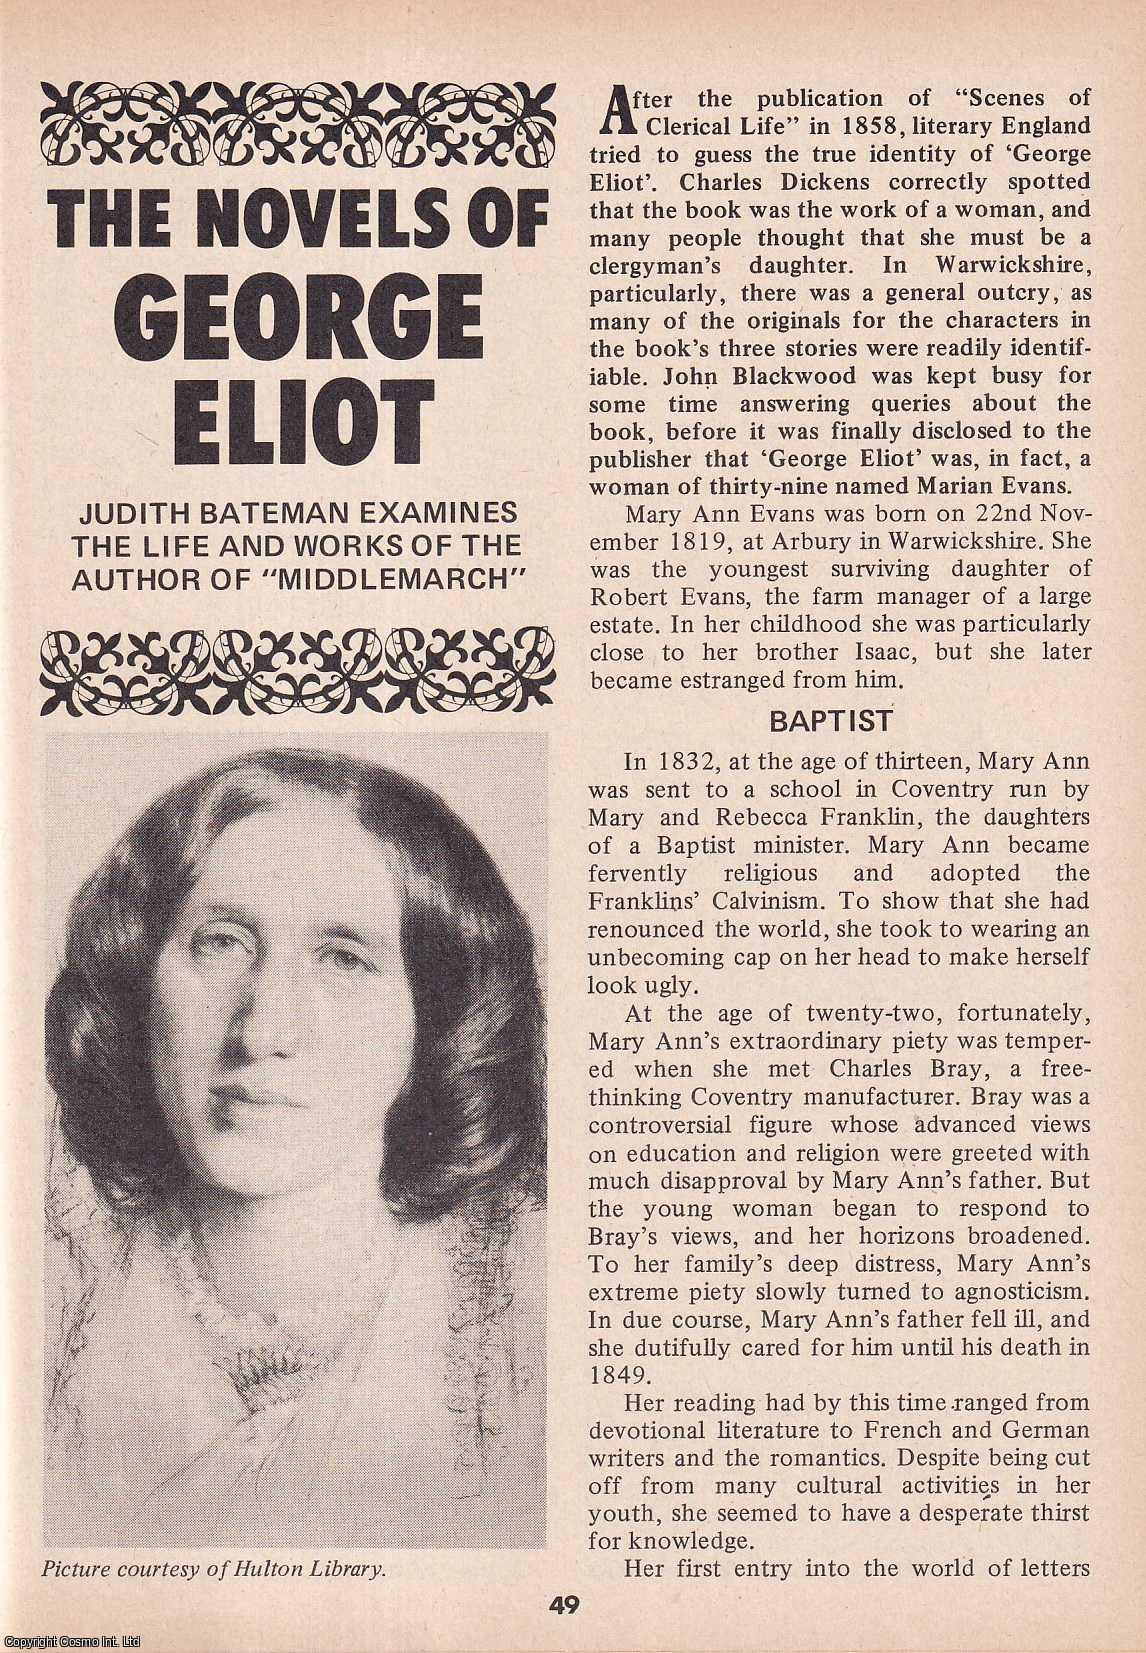 Judith Bateman - The Novels of George Eliot. Examining The Life and Works of The Author. This is an original article separated from an issue of The Book & Magazine Collector publication.